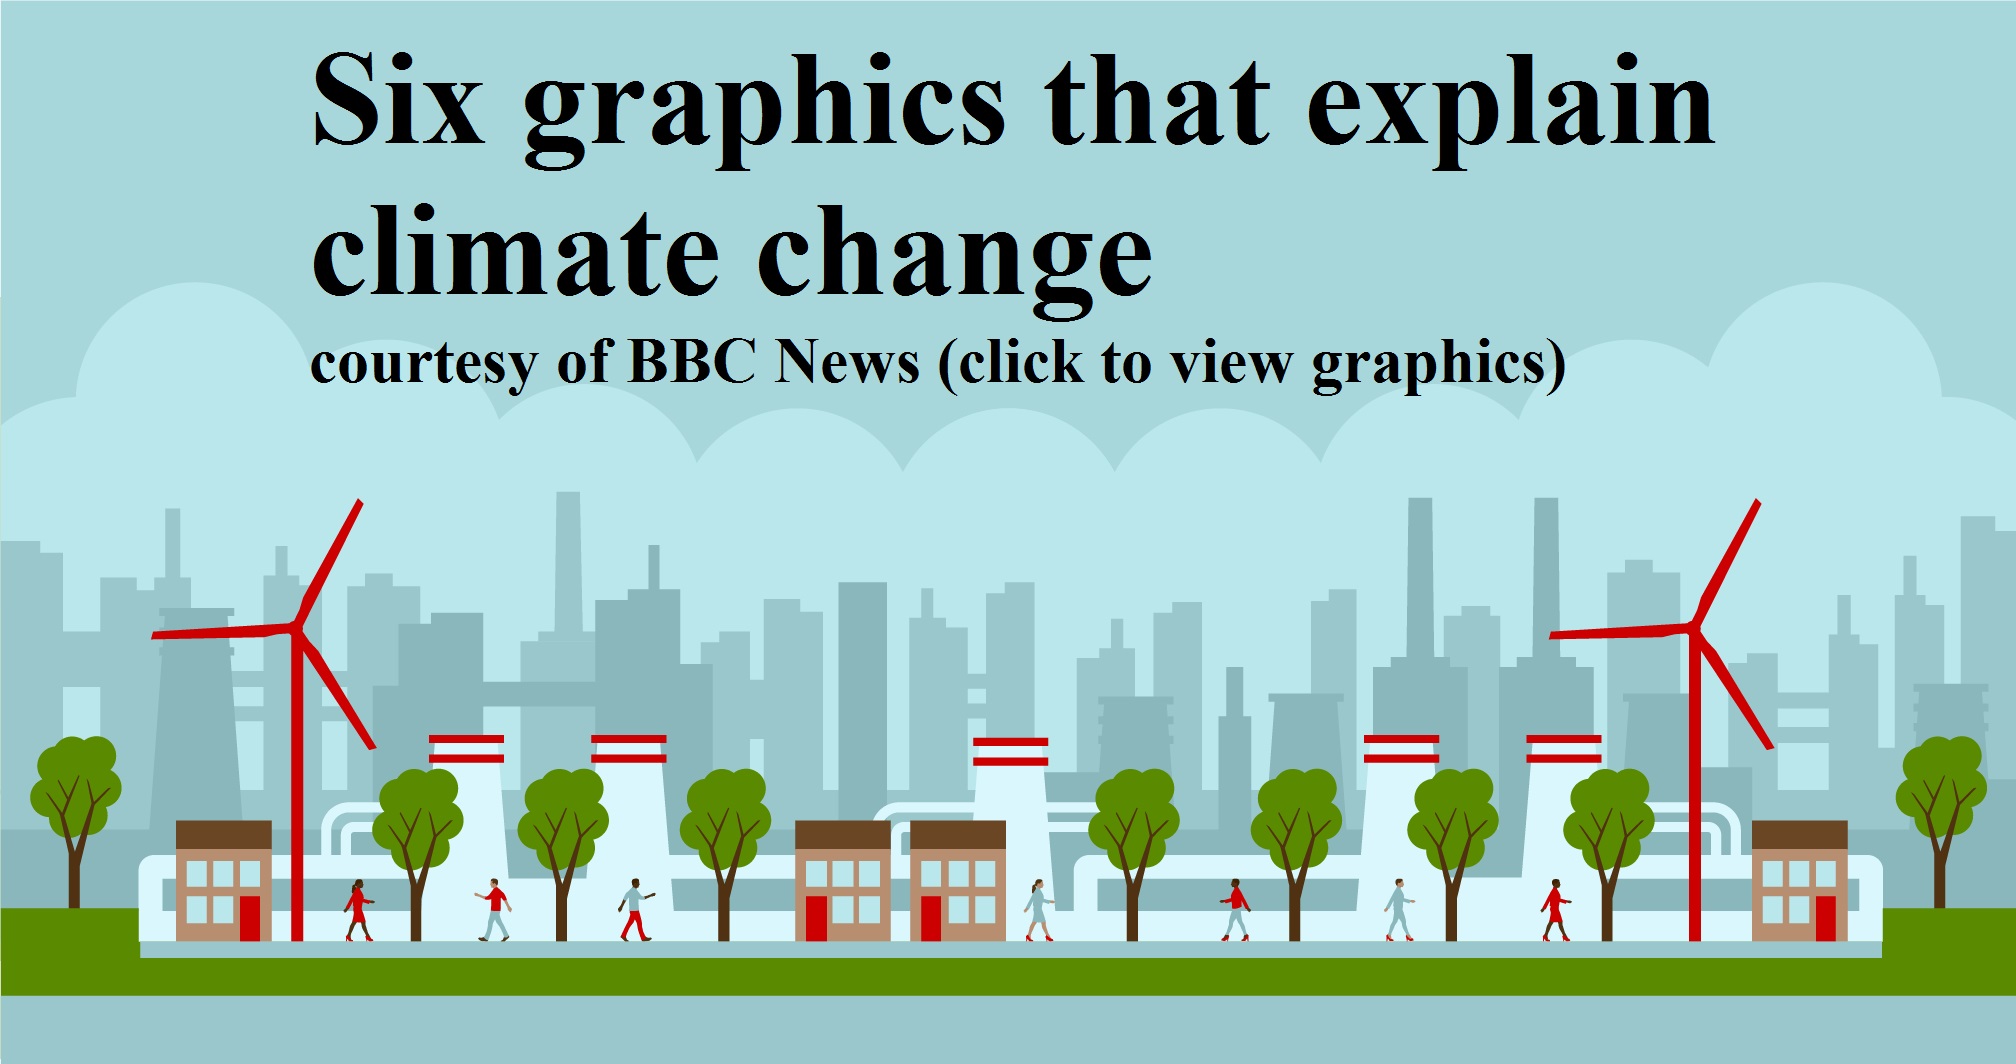 SIX GRAPHICS THAT EXPLAIN CLIMATE CHANGE FROM BBC NEWS